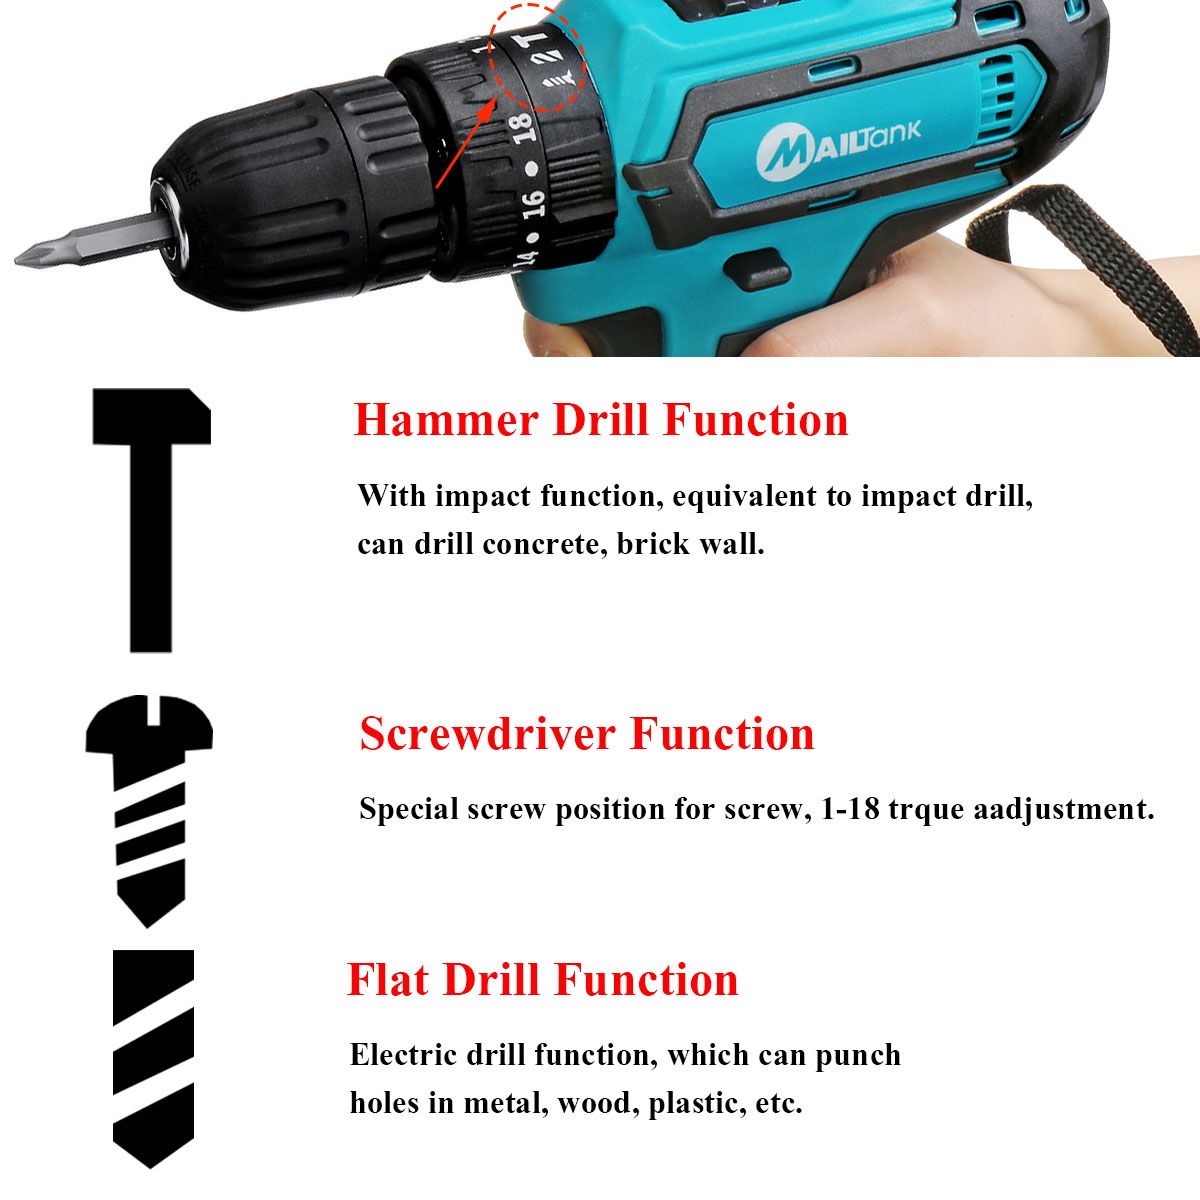 32V-2-Speed-Power-Drills-6000mah-Cordless-Drill-3-IN-1-Electric-Screwdriver-Hammer-Drill-with-2pcs-B-1416071